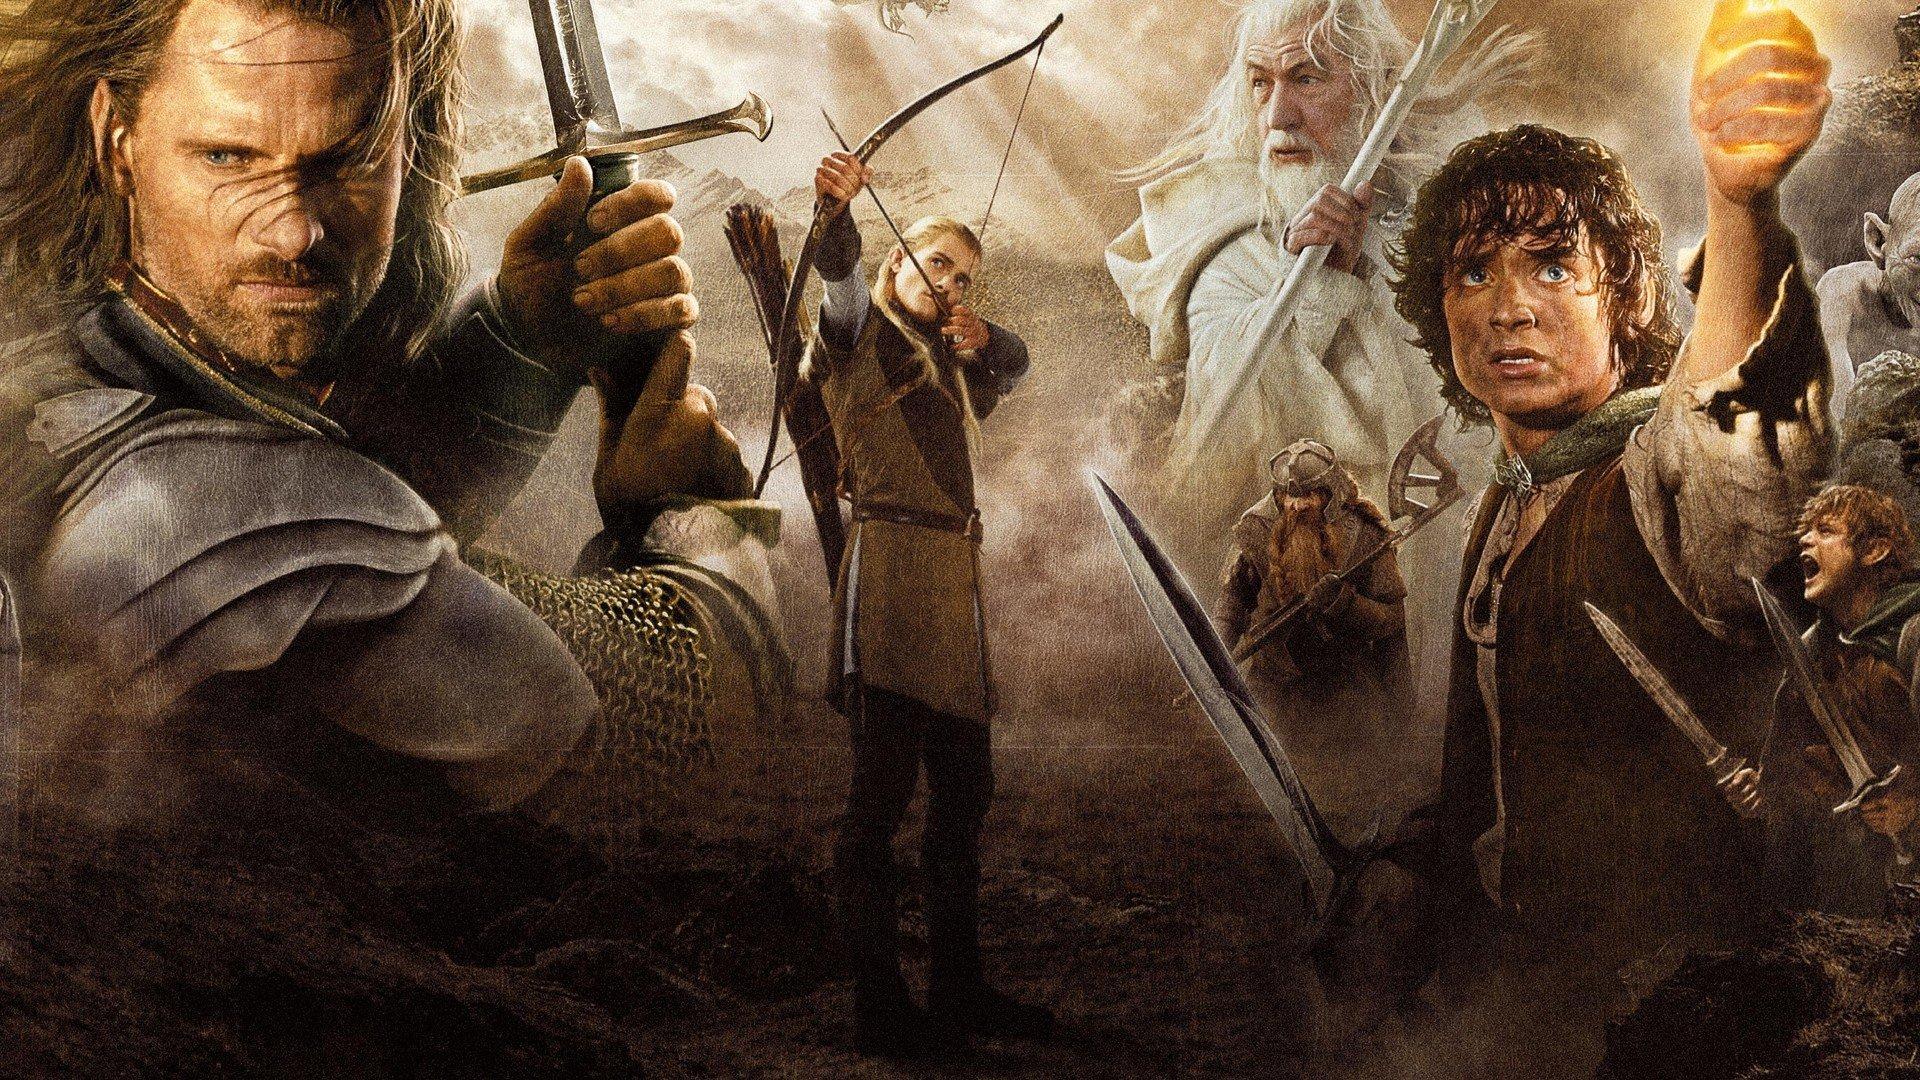 The Lord of the Rings: The Return of the King Wallpaper 6 X